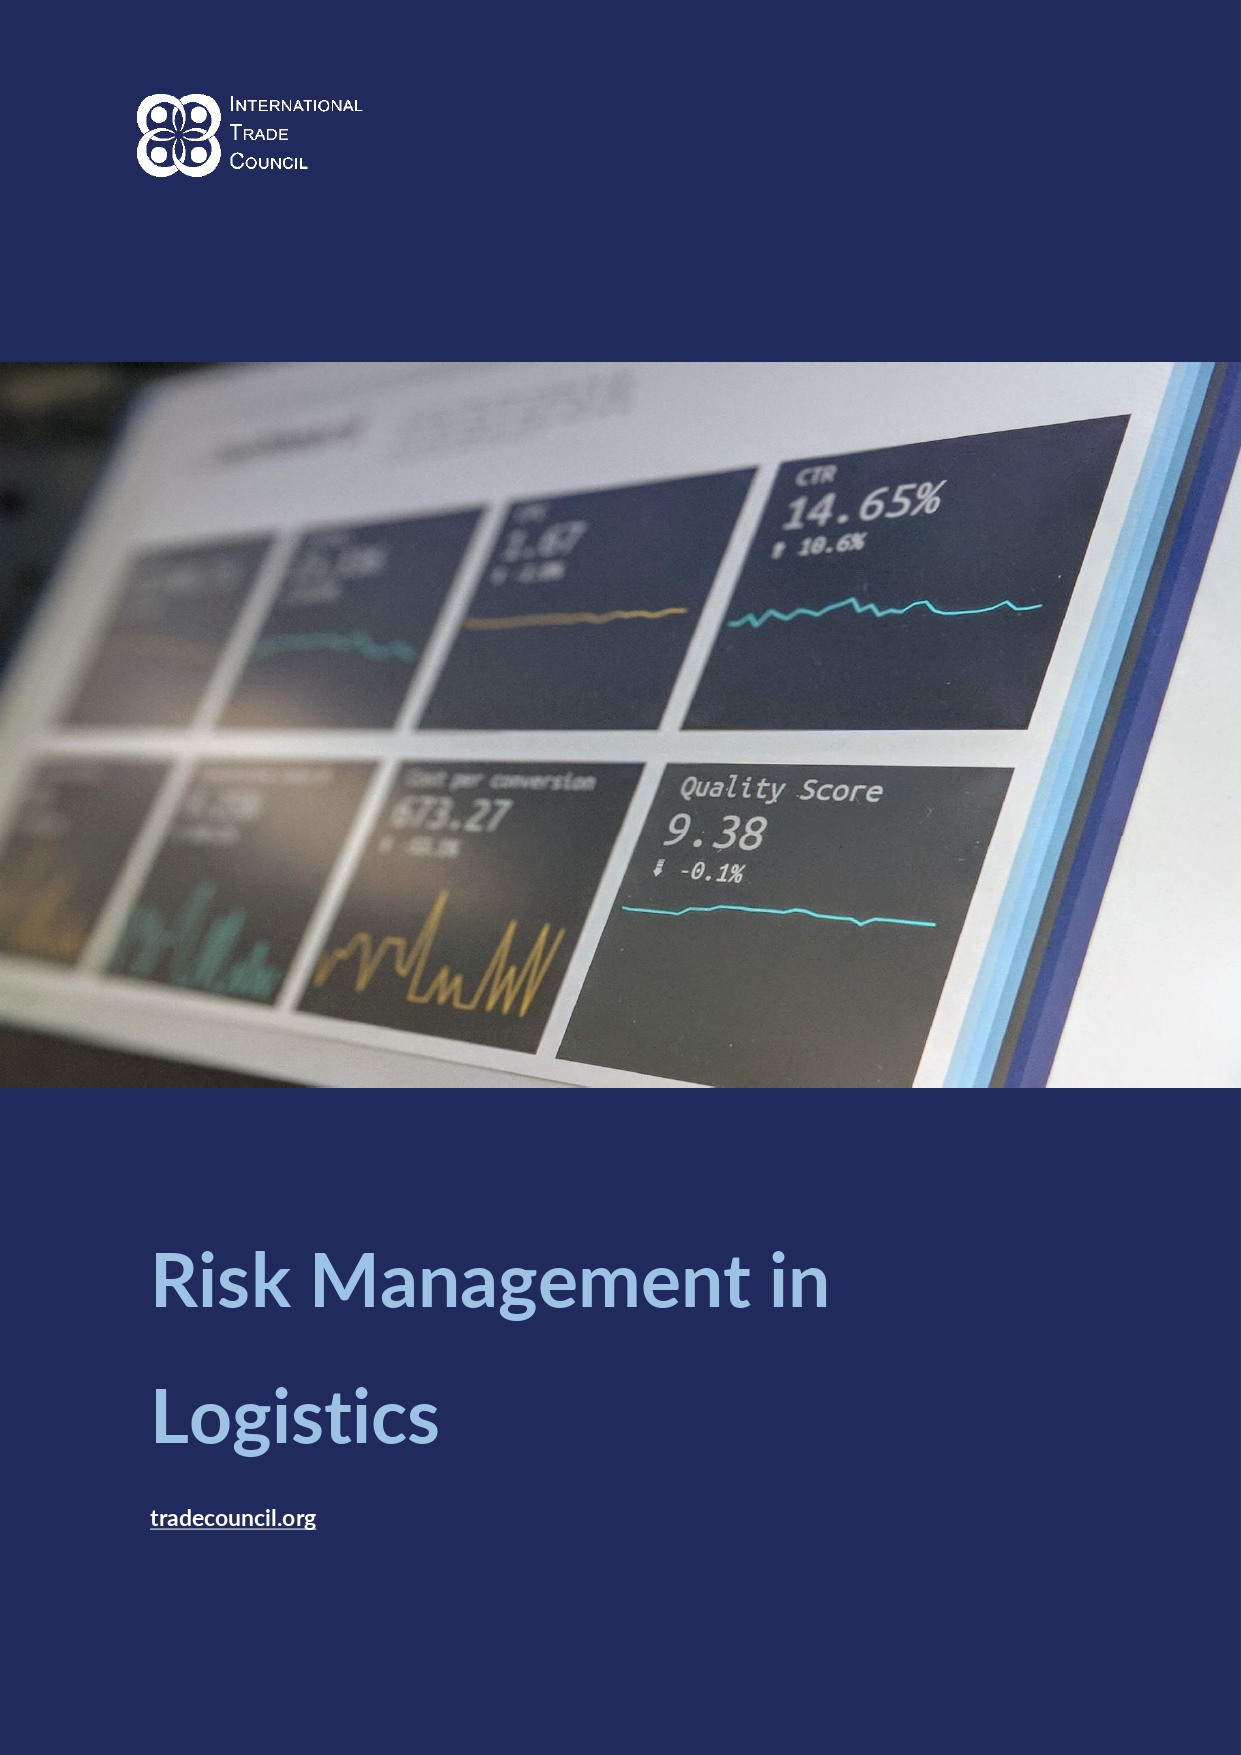 Risk Management in Logistics from the International Trade Council your international chamber of commerce